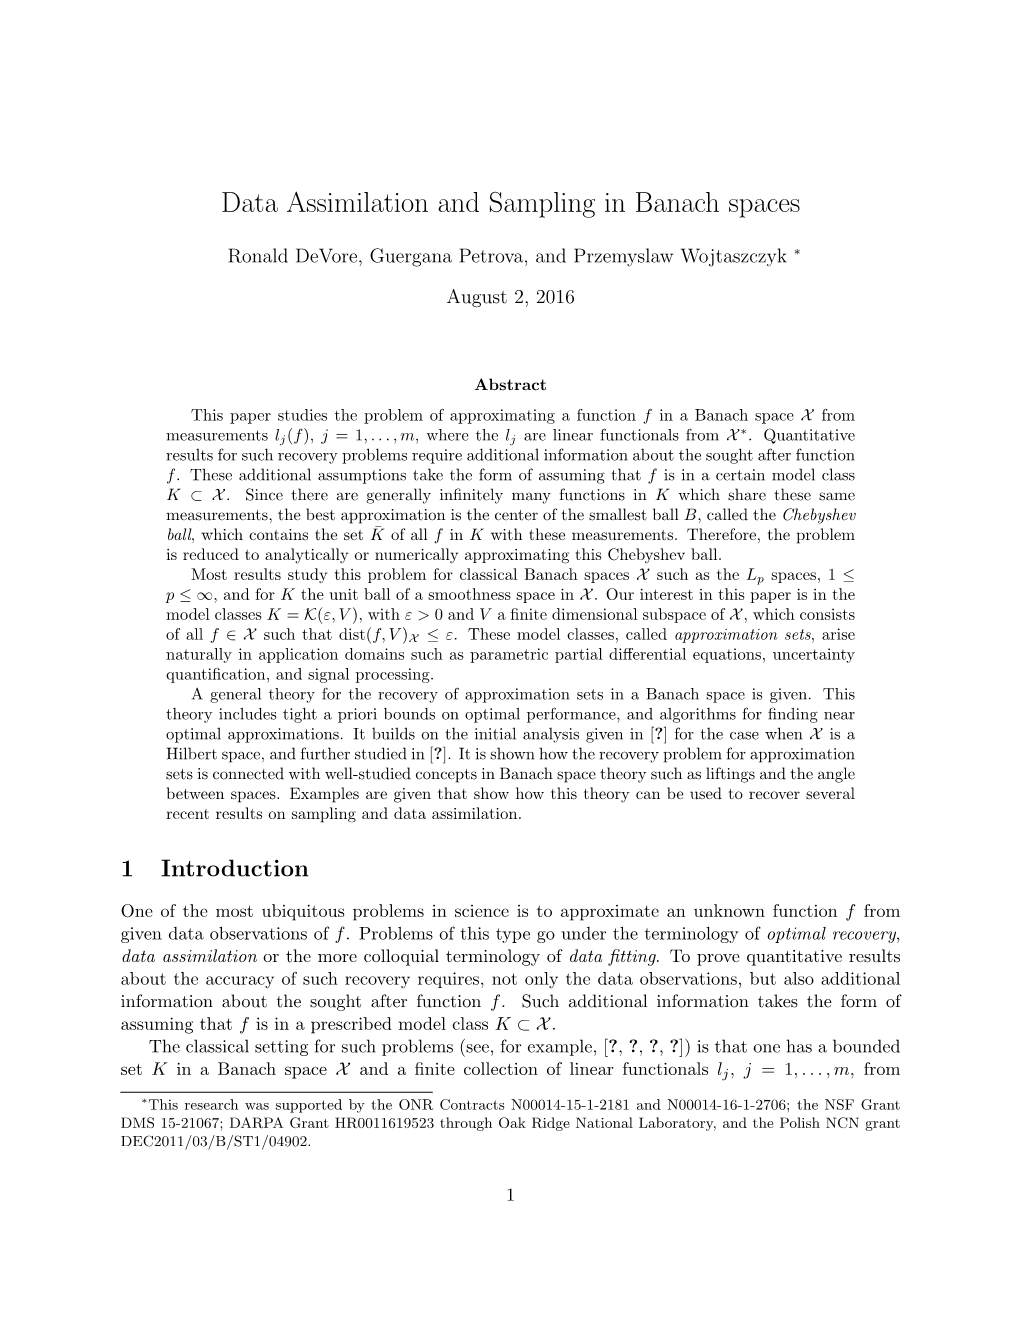 Data Assimilation and Sampling in Banach Spaces